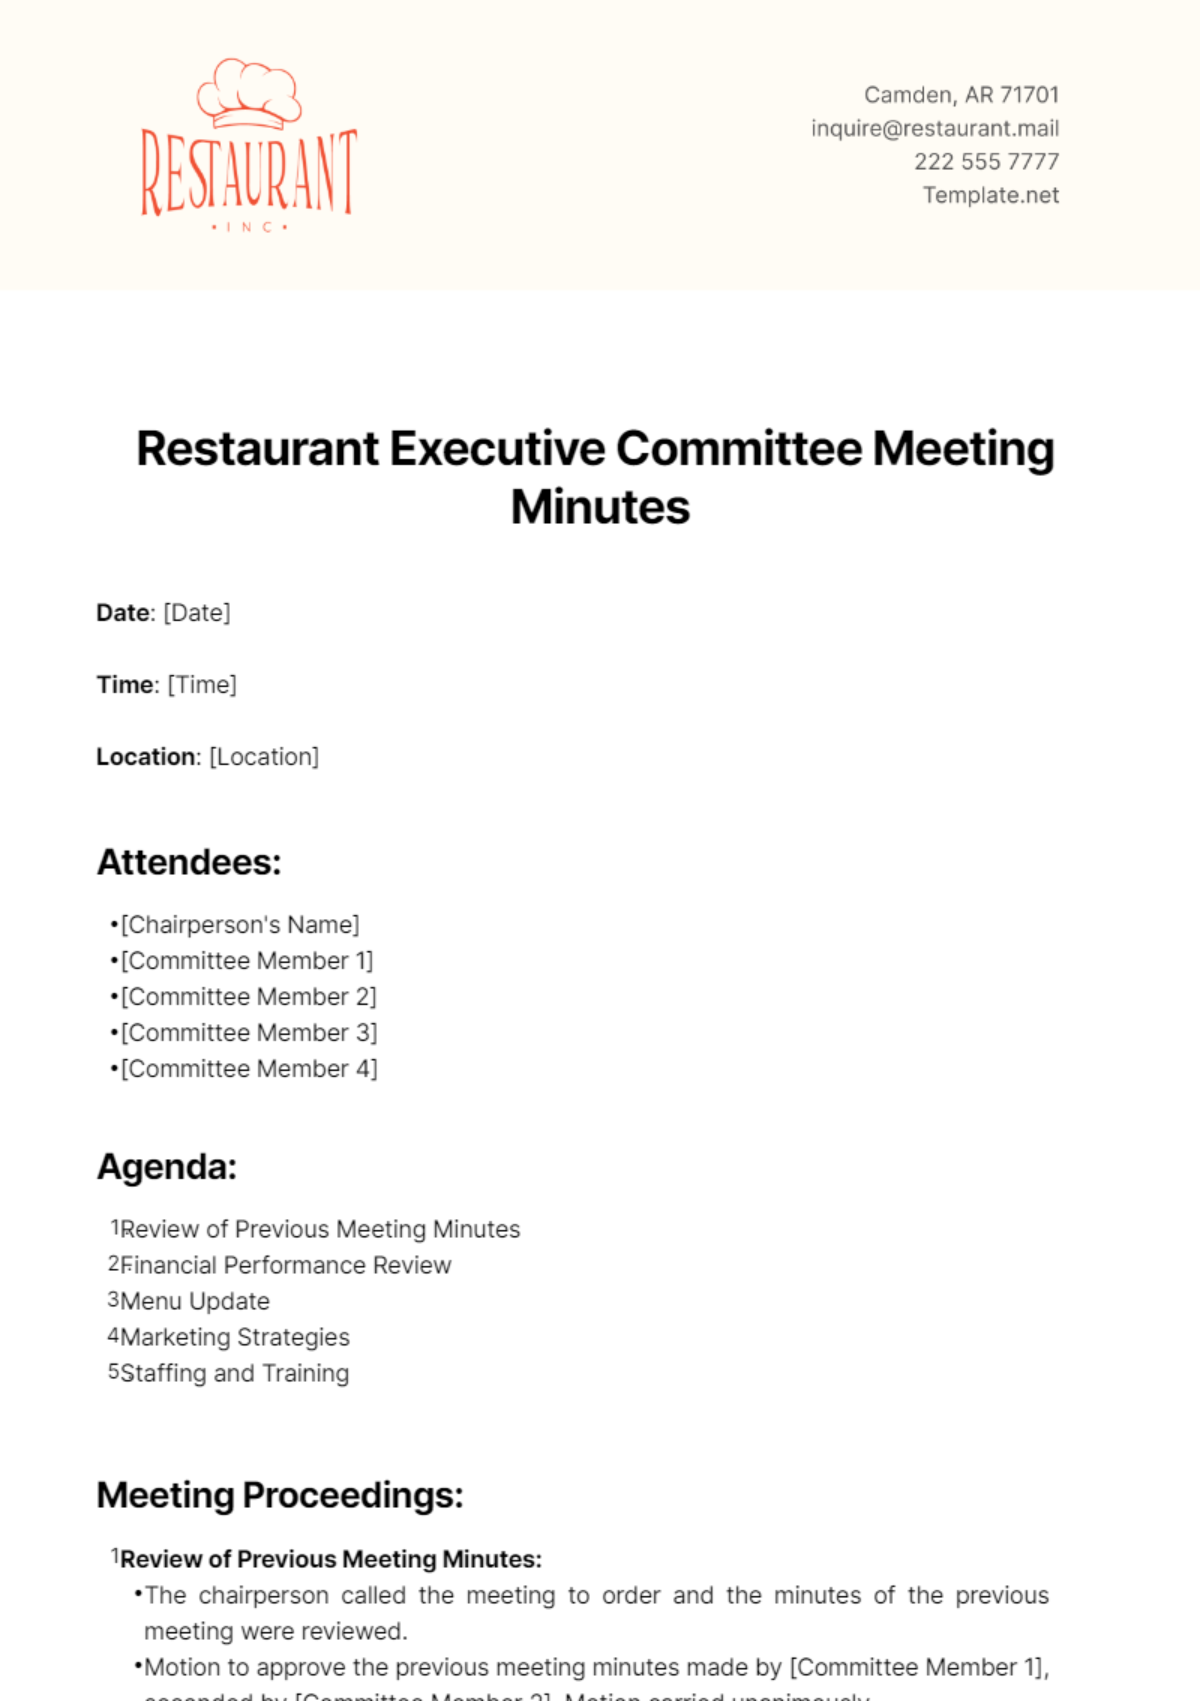 Free Restaurant Executive Committee Meeting Minutes Template